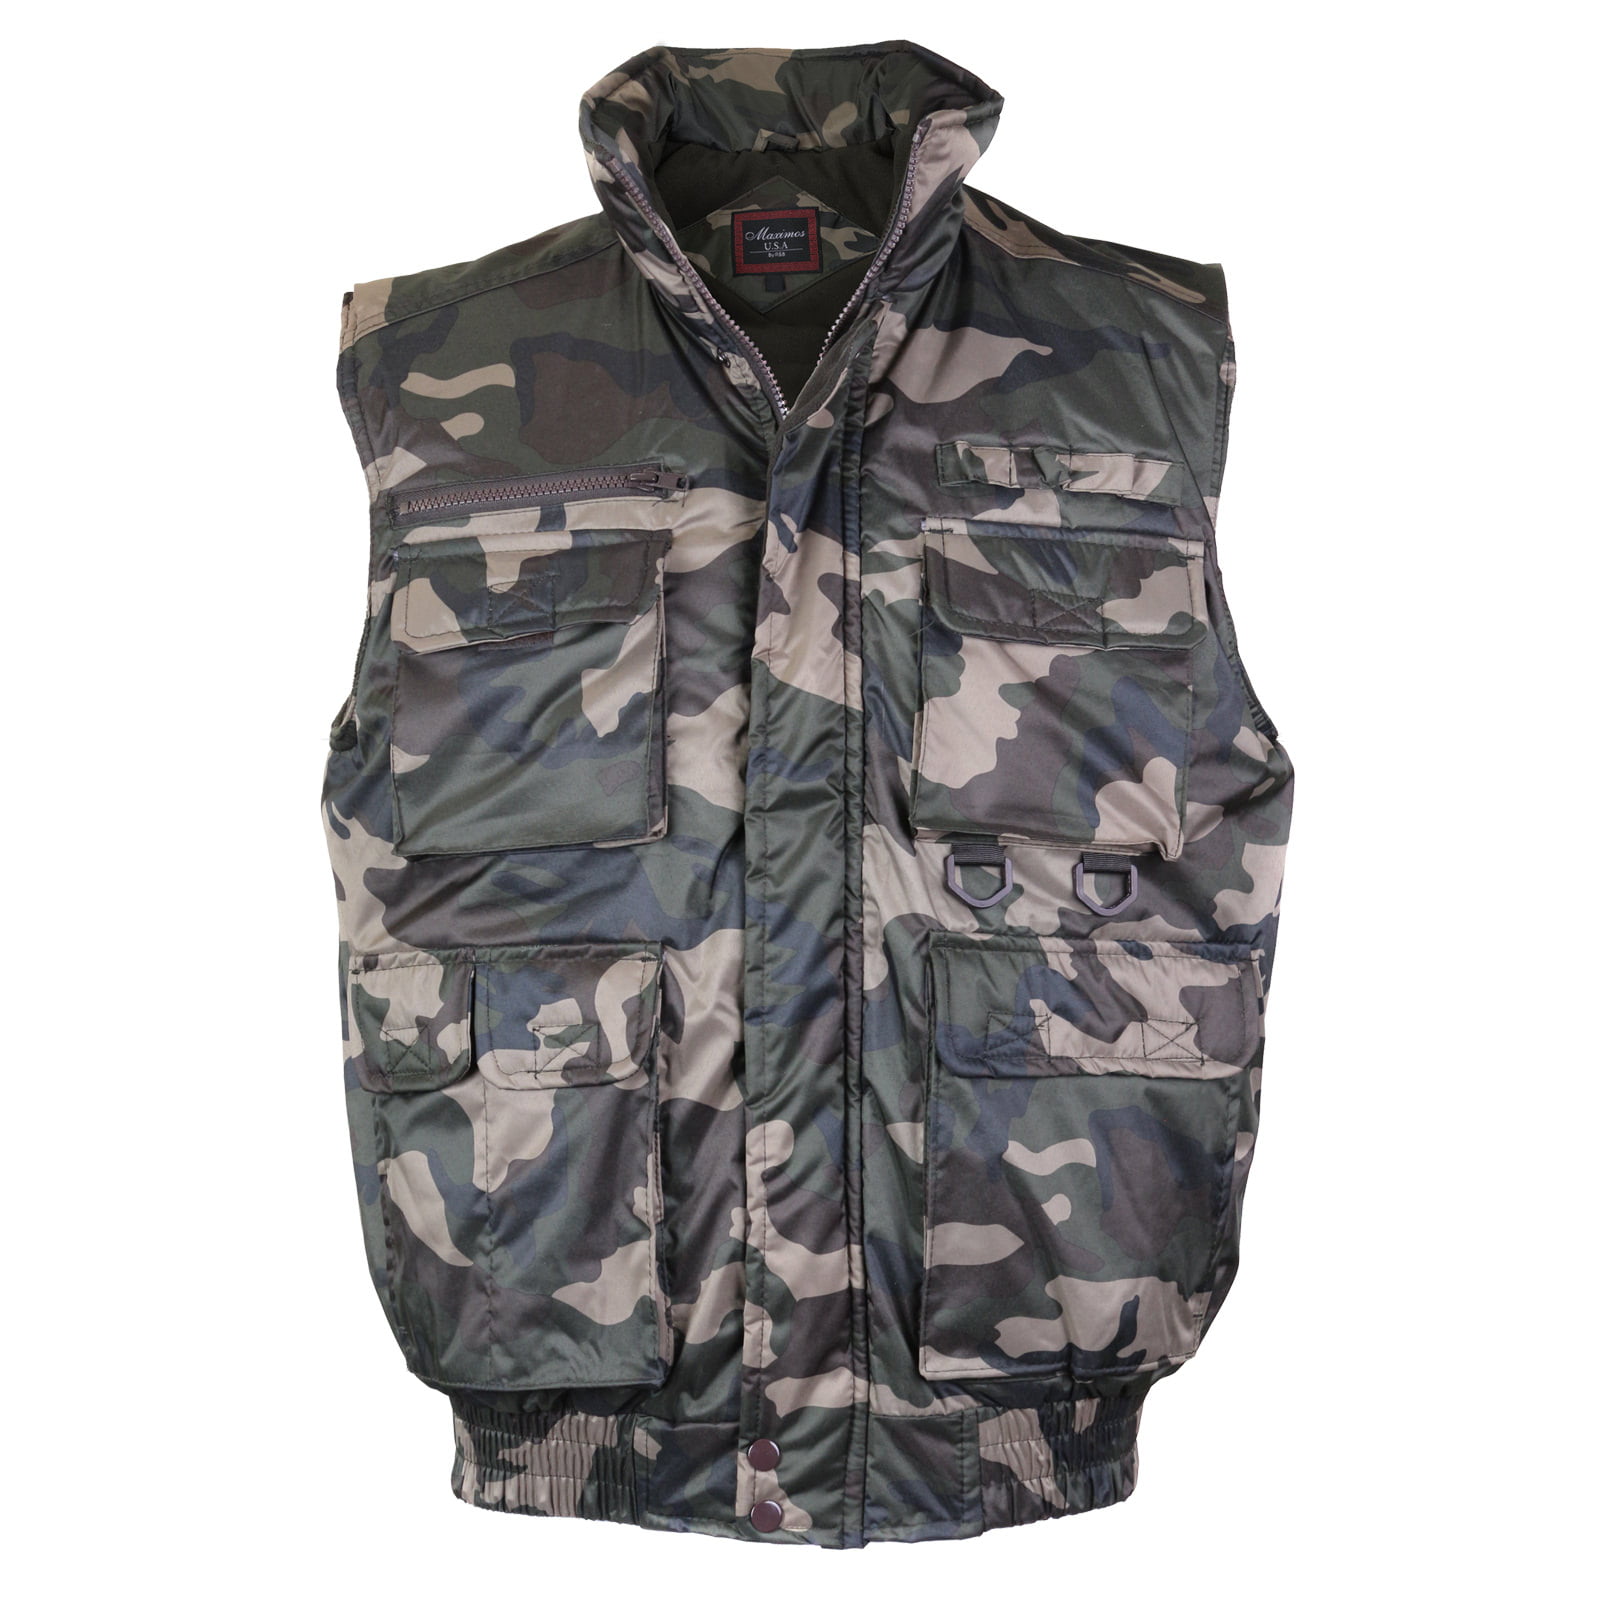 Fleece Lined Tactical Vest Hunting Fishing Camping 3 Colors Available L XL 